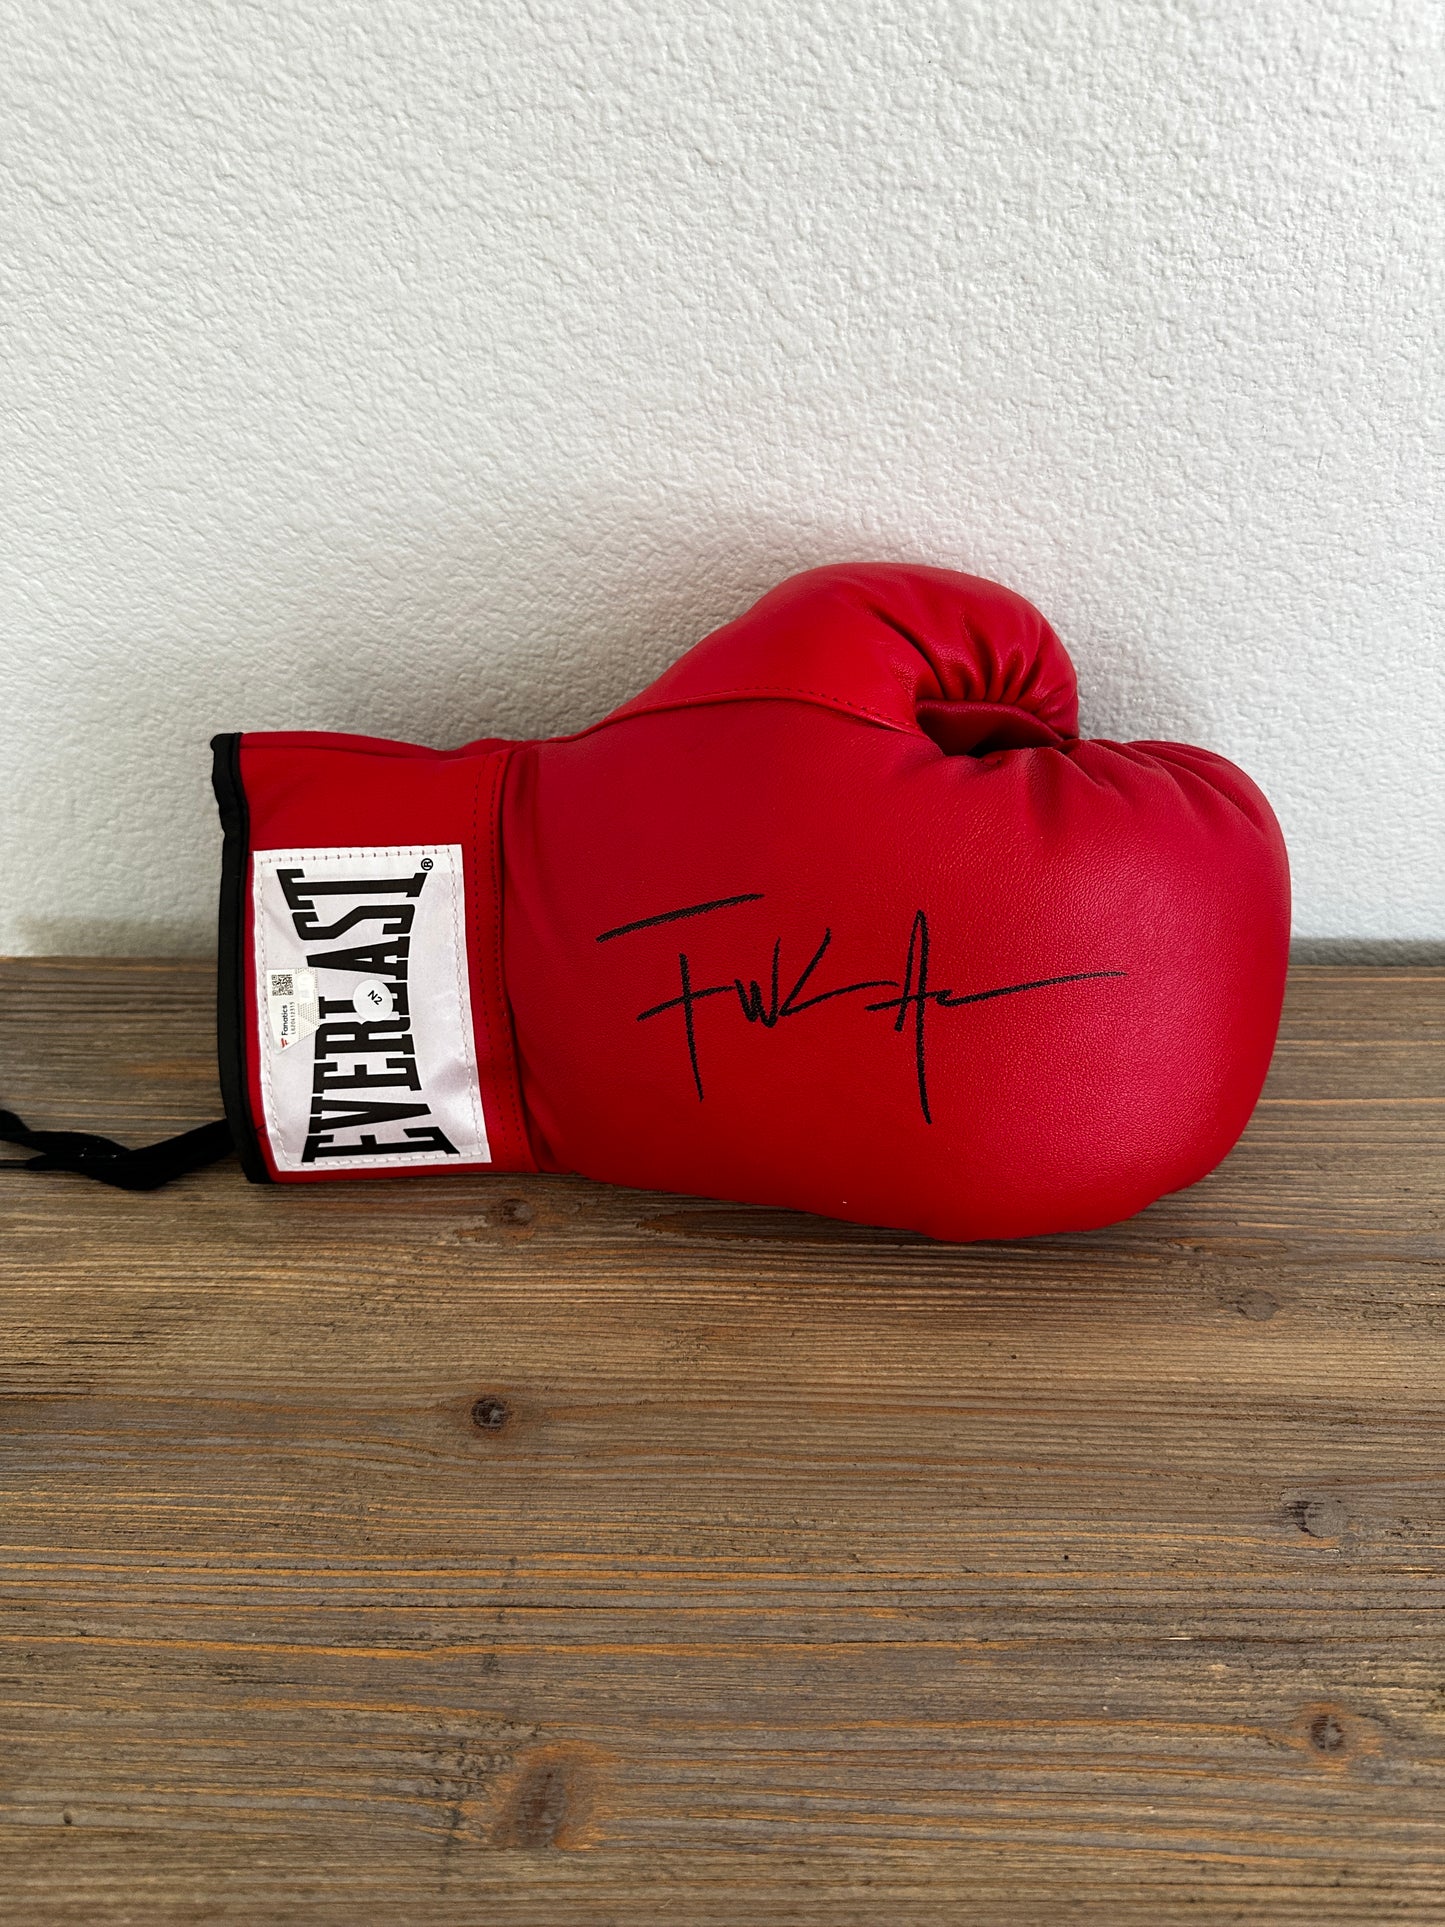 Frank Gore signed everlast boxing glove